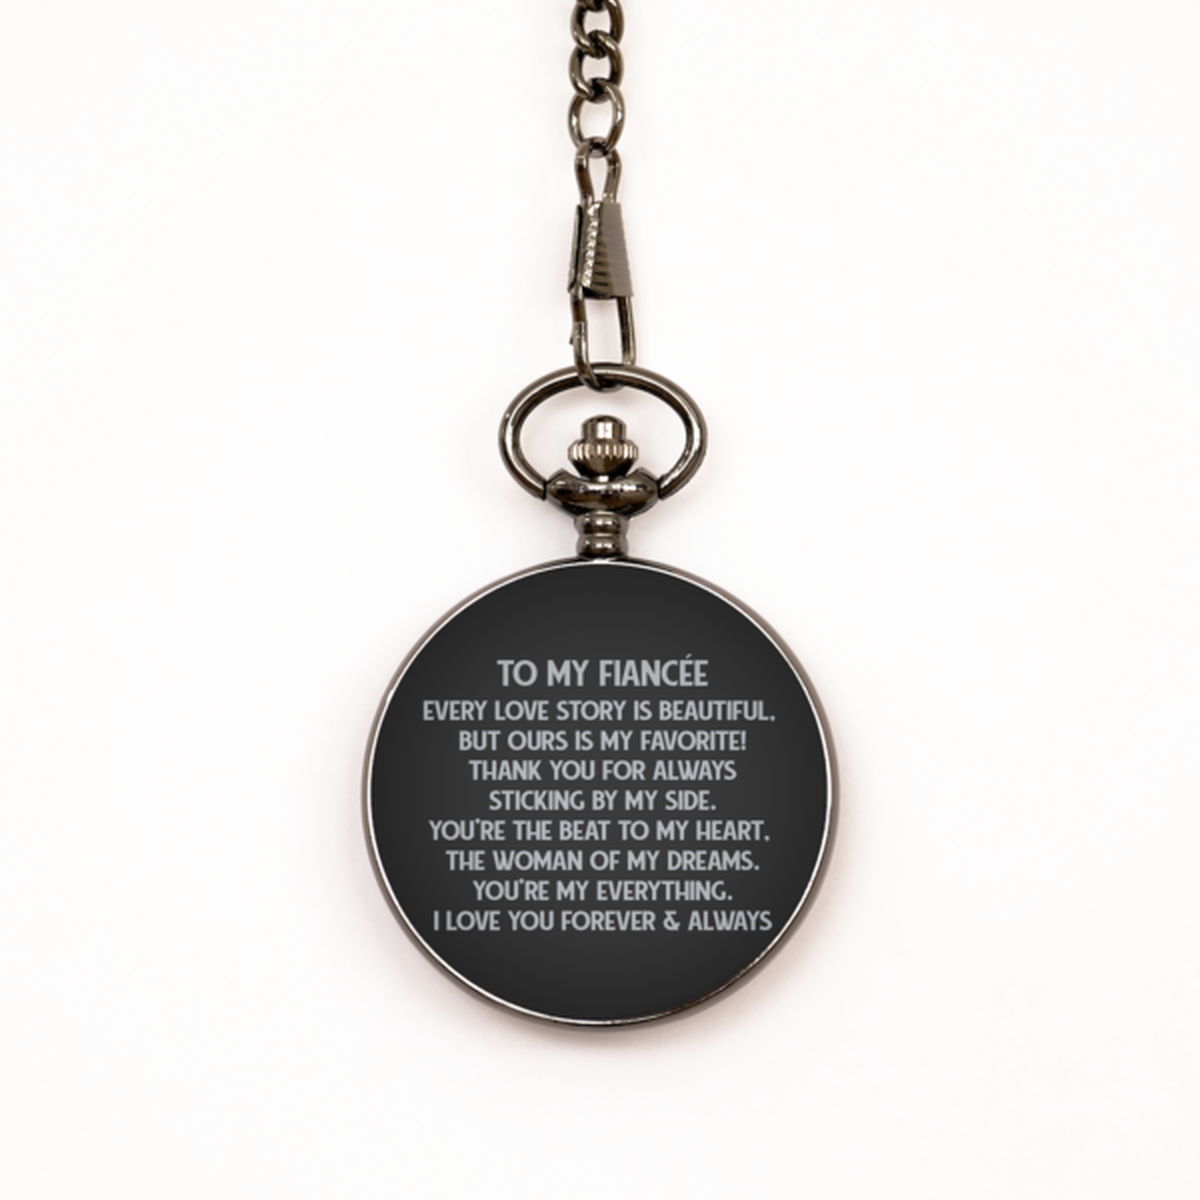 To My Fiancée  Black Pocket Watch, Every Love Story Is Beautiful, Birthday Gifts For Fiancée  From Fiancé, Valentines Gifts For Women